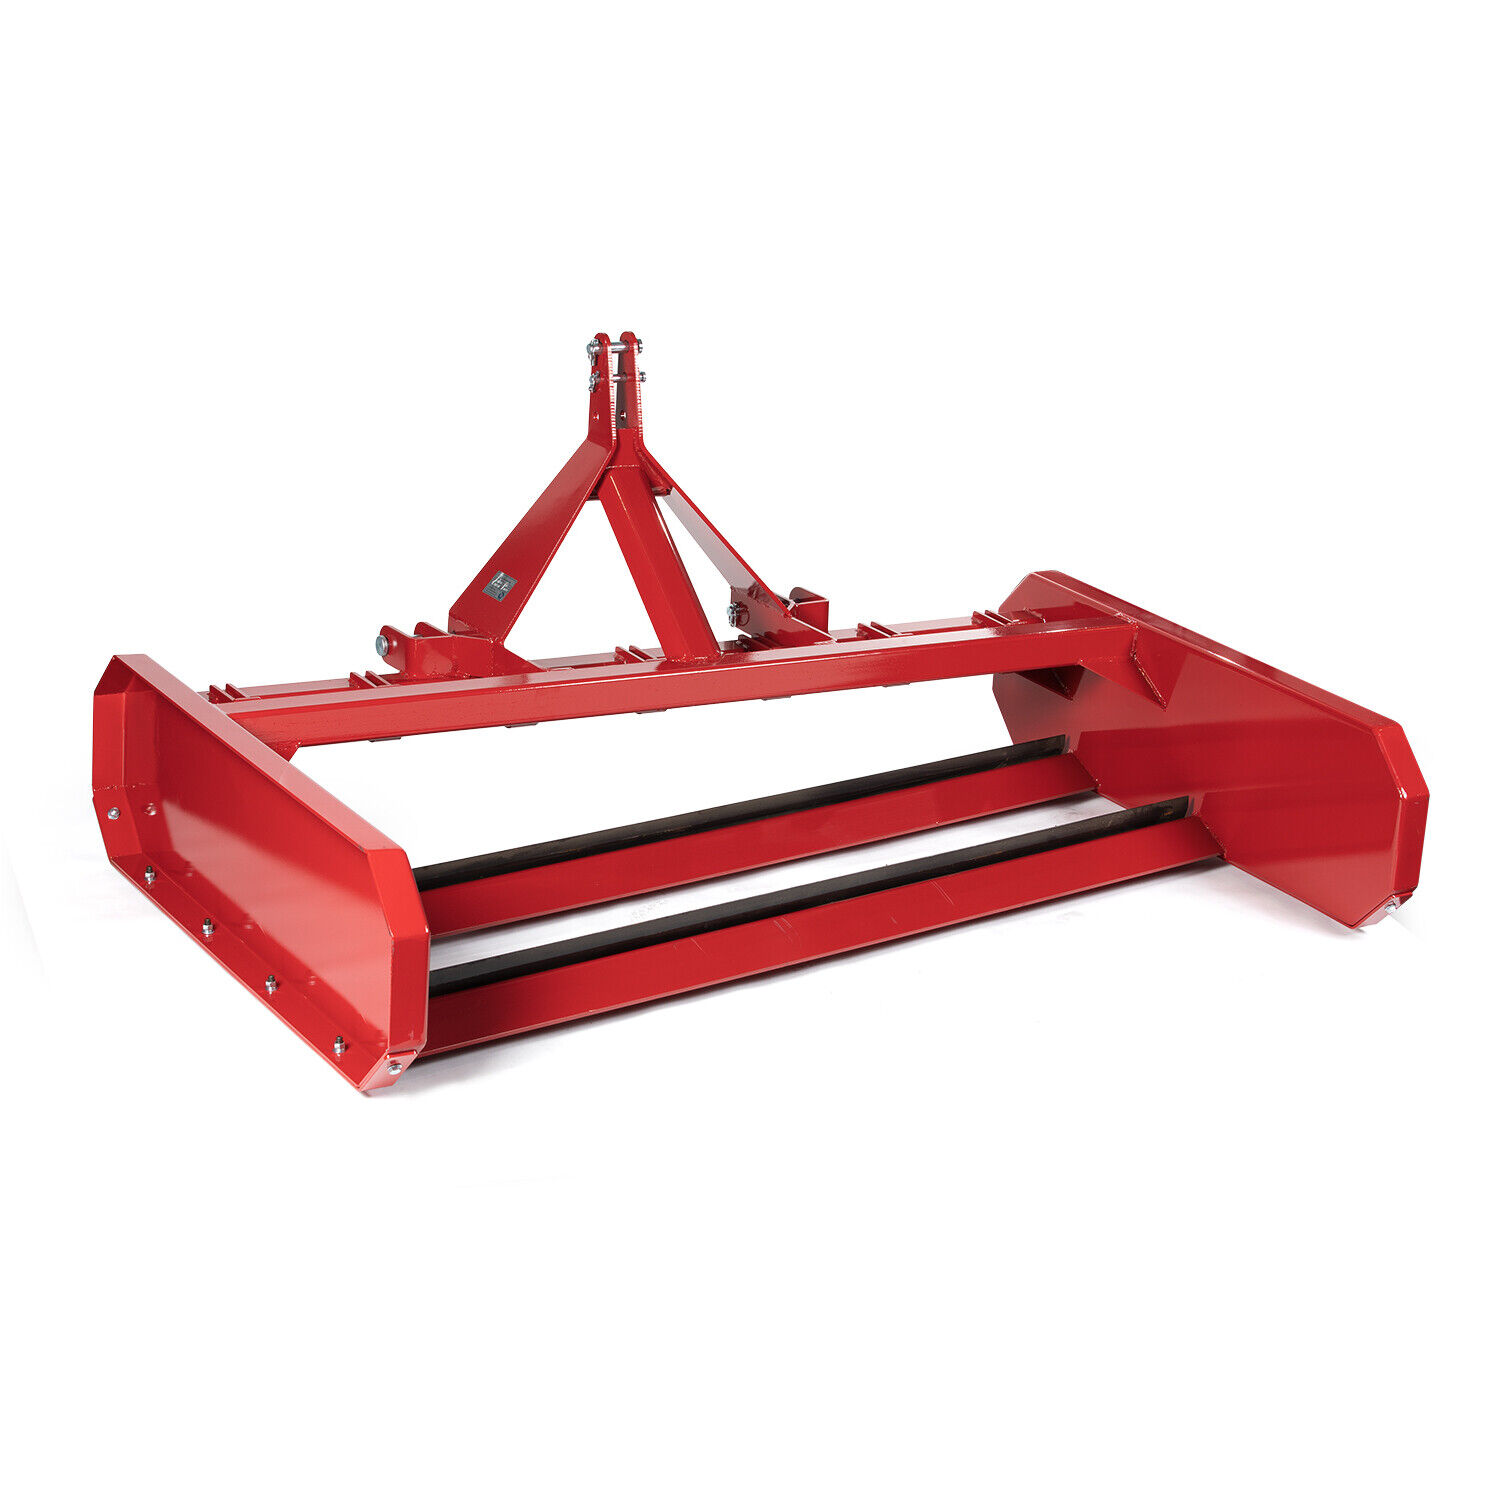 Titan Attachments 7' Land Leveler And Grader For 3 Pt Tractor Fits Cat 1 And 2